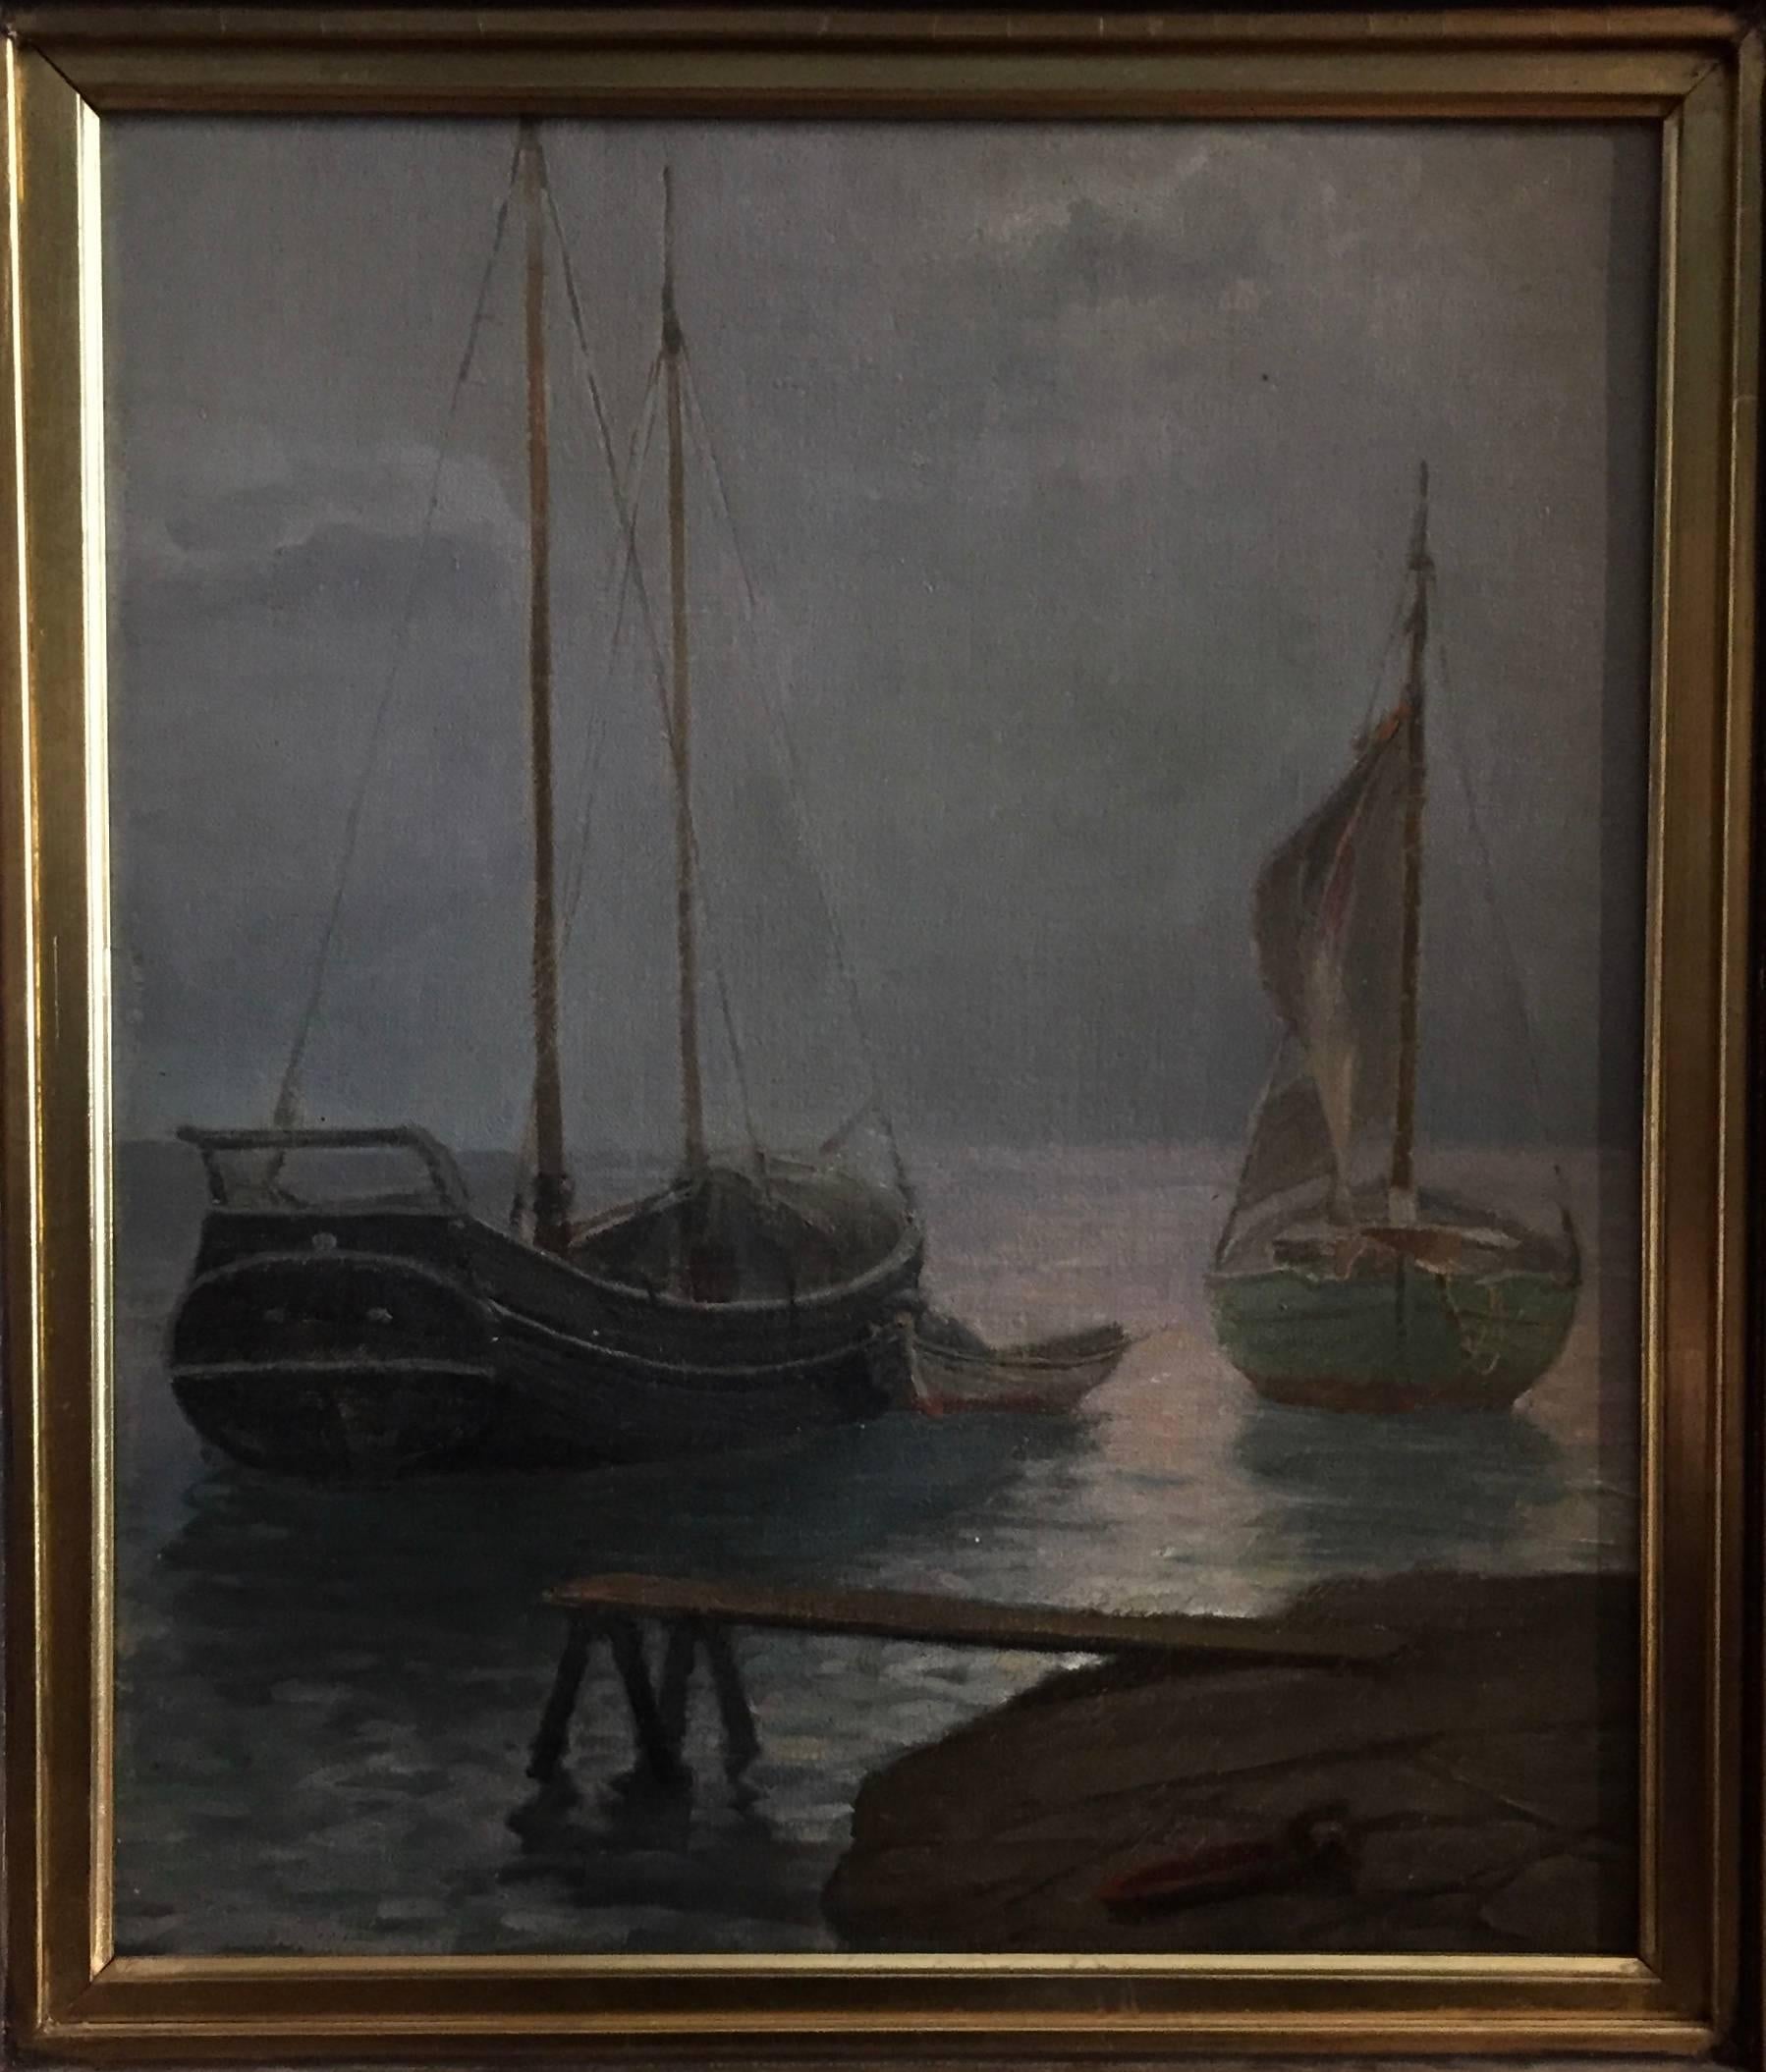 A rather moody seascape harbor scene by Danish painter Peter Busch. This one likely executed, circa 1900 after he settle in California. He is mentioned in Edan Hughes's book 